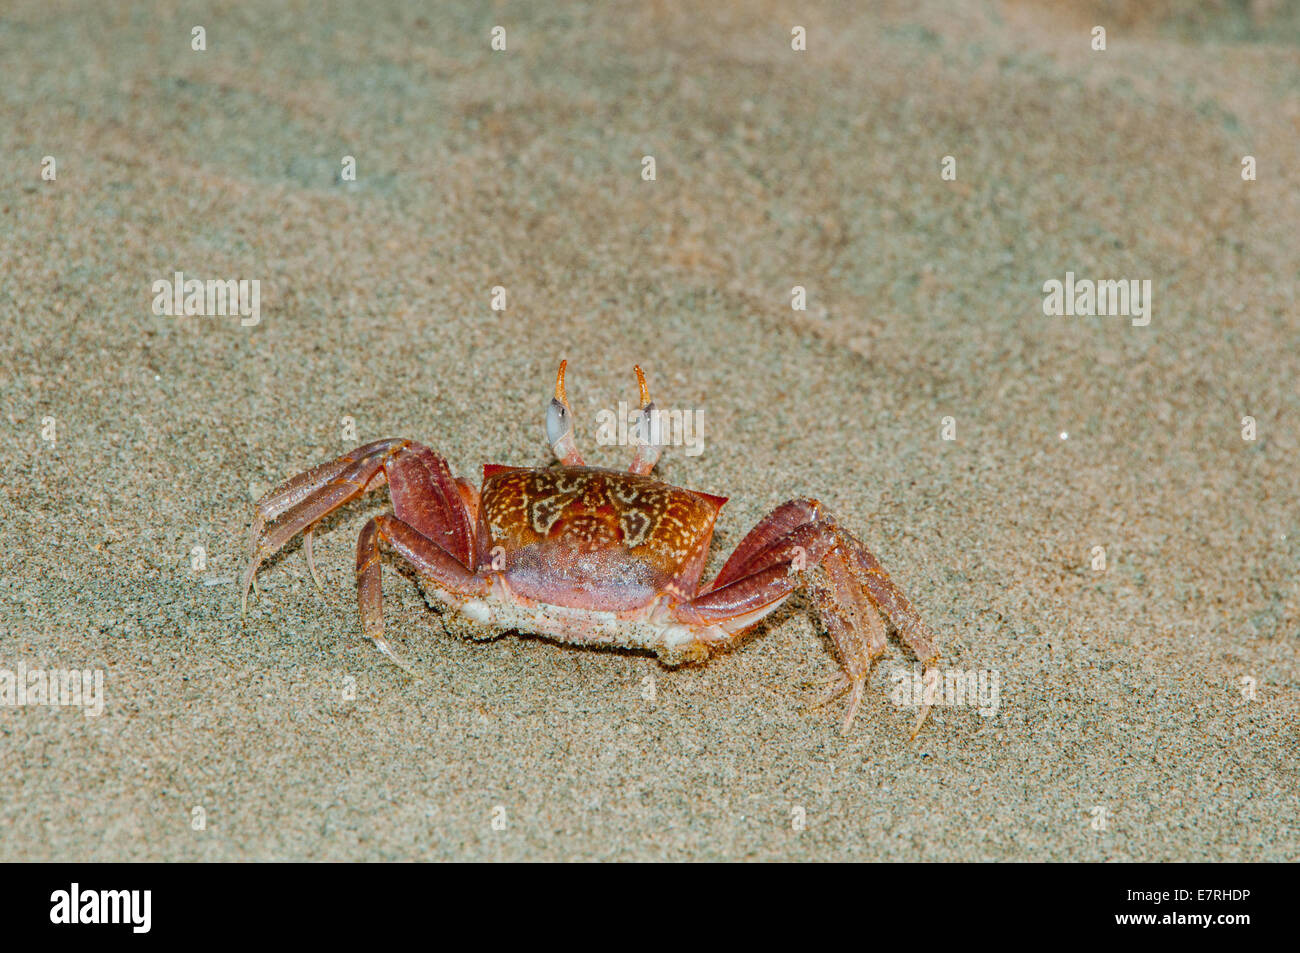 Rear view of Painted Chost Crab (Ocypode gaudichaudii) with intricate patterns Stock Photo